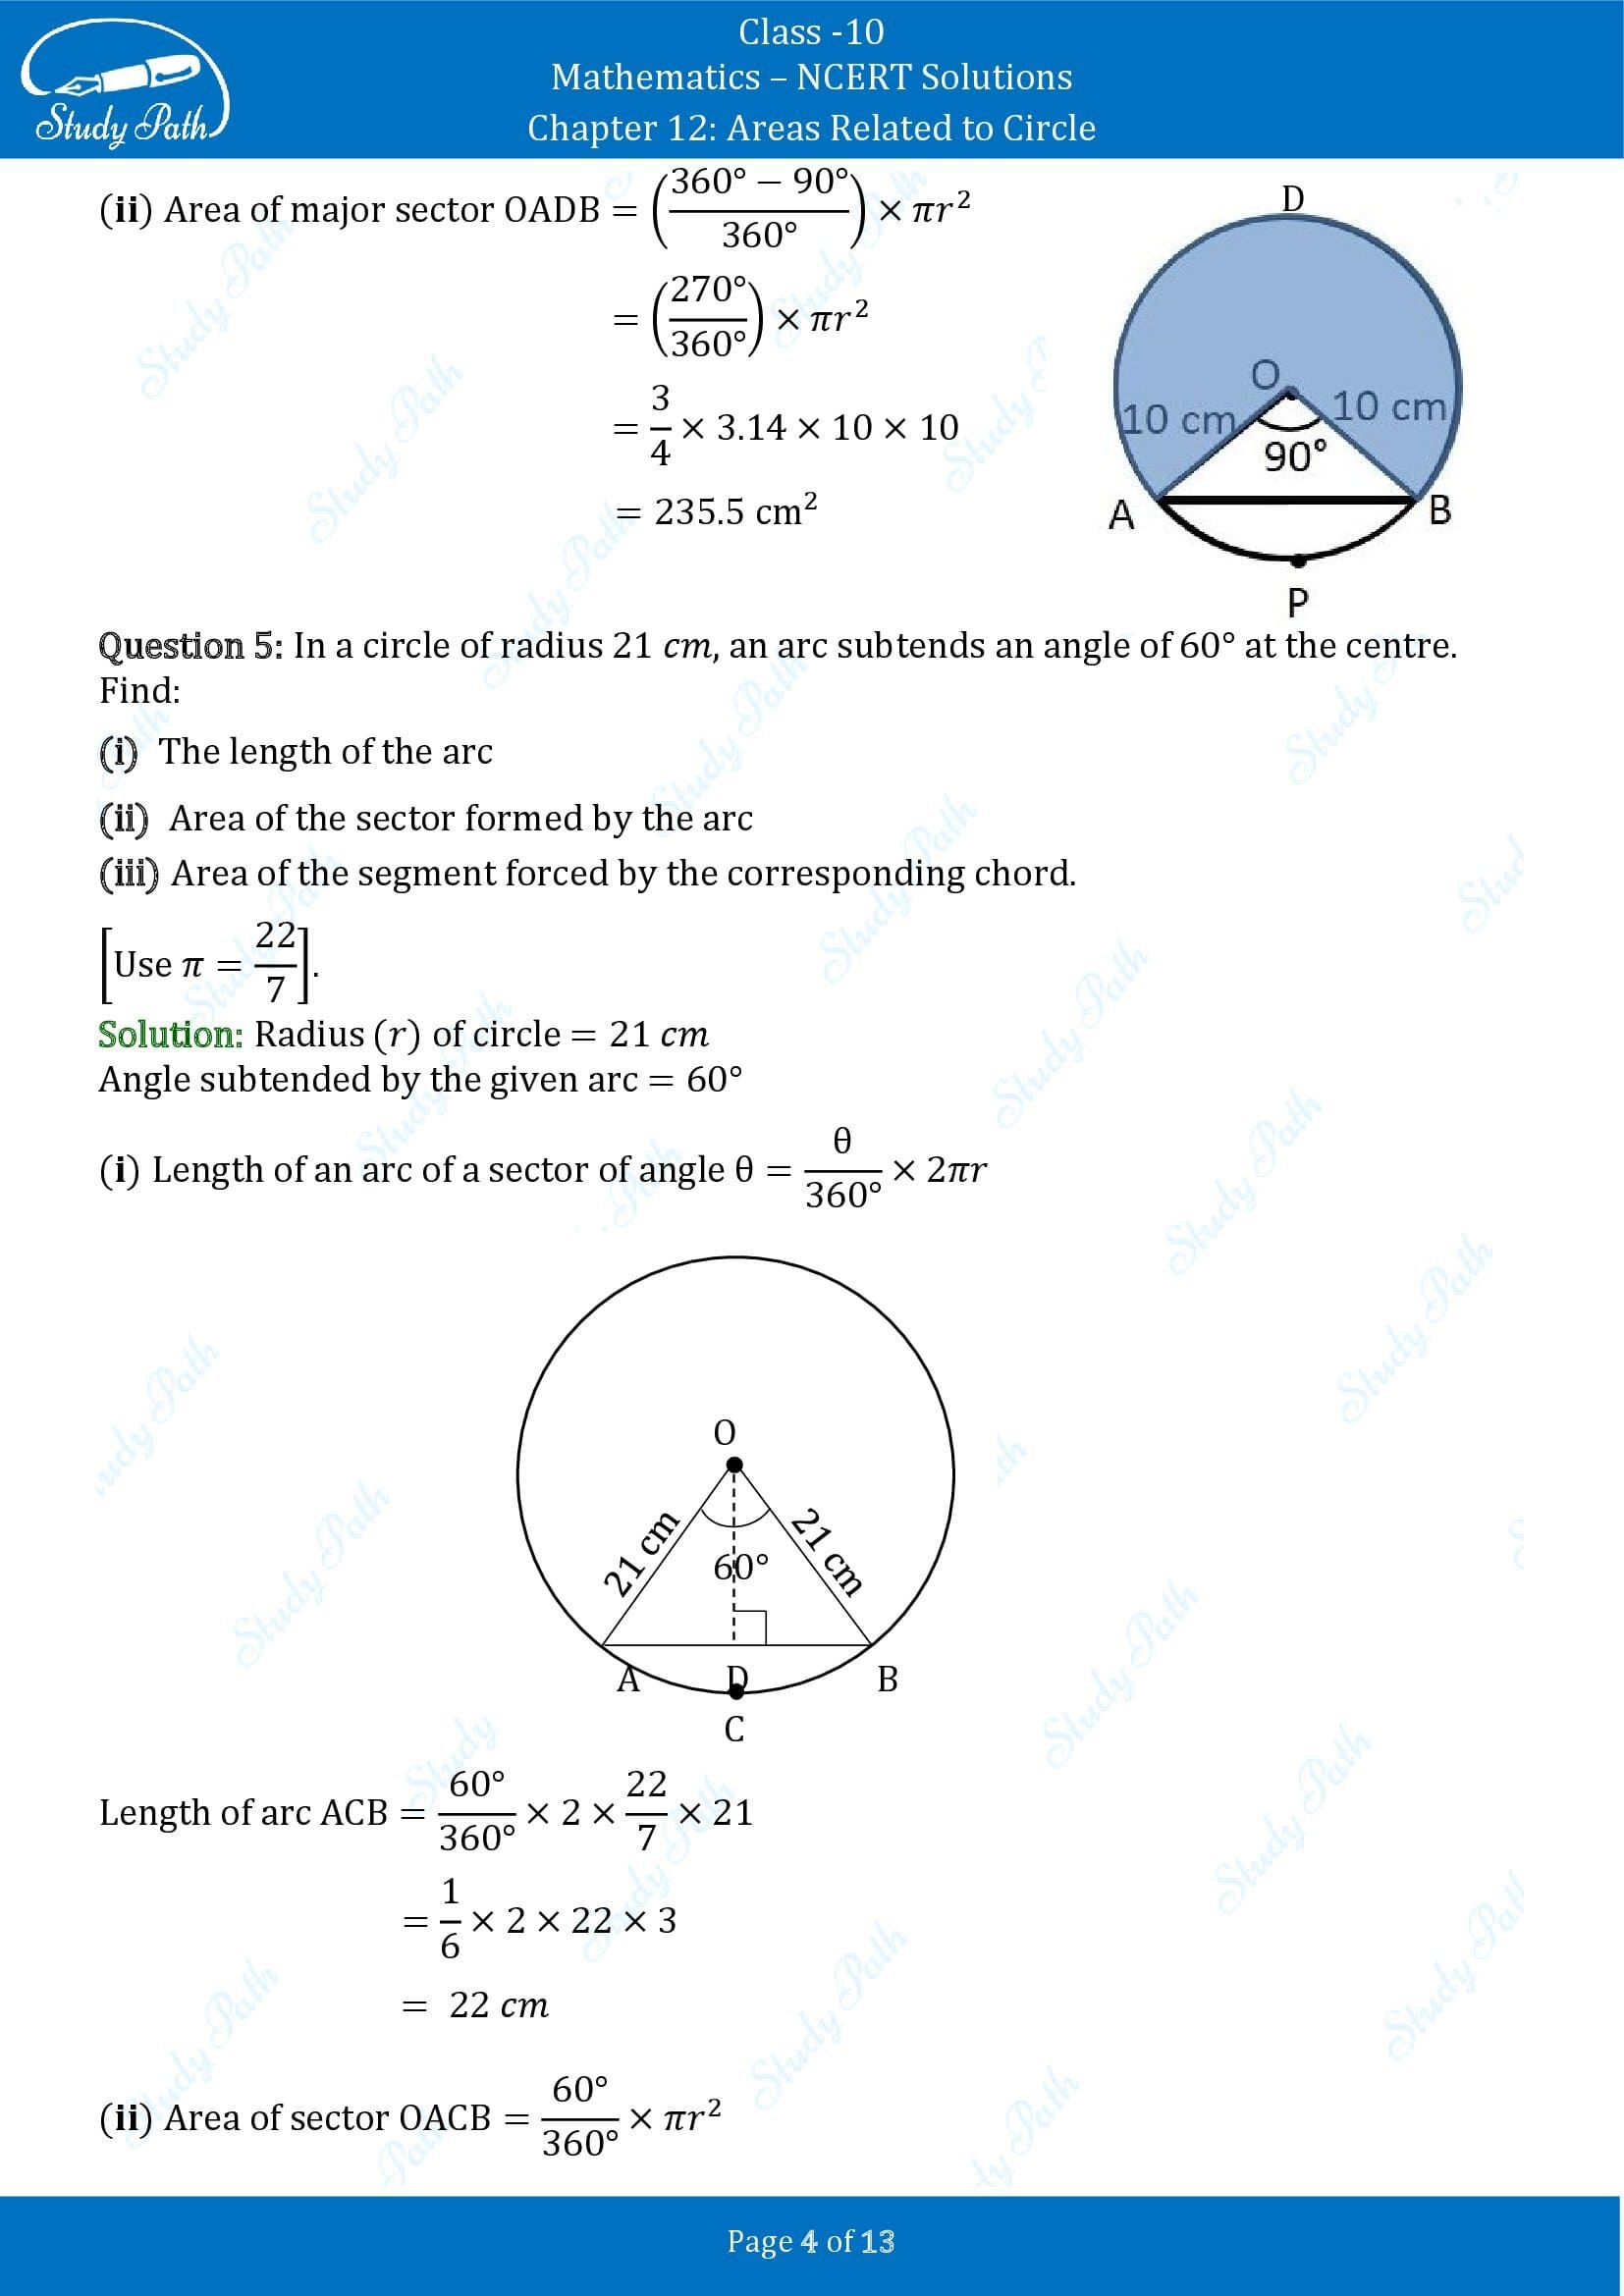 NCERT Solutions for Class 10 Maths Chapter 12 Areas Related to Circles Exercise 12.2 00004